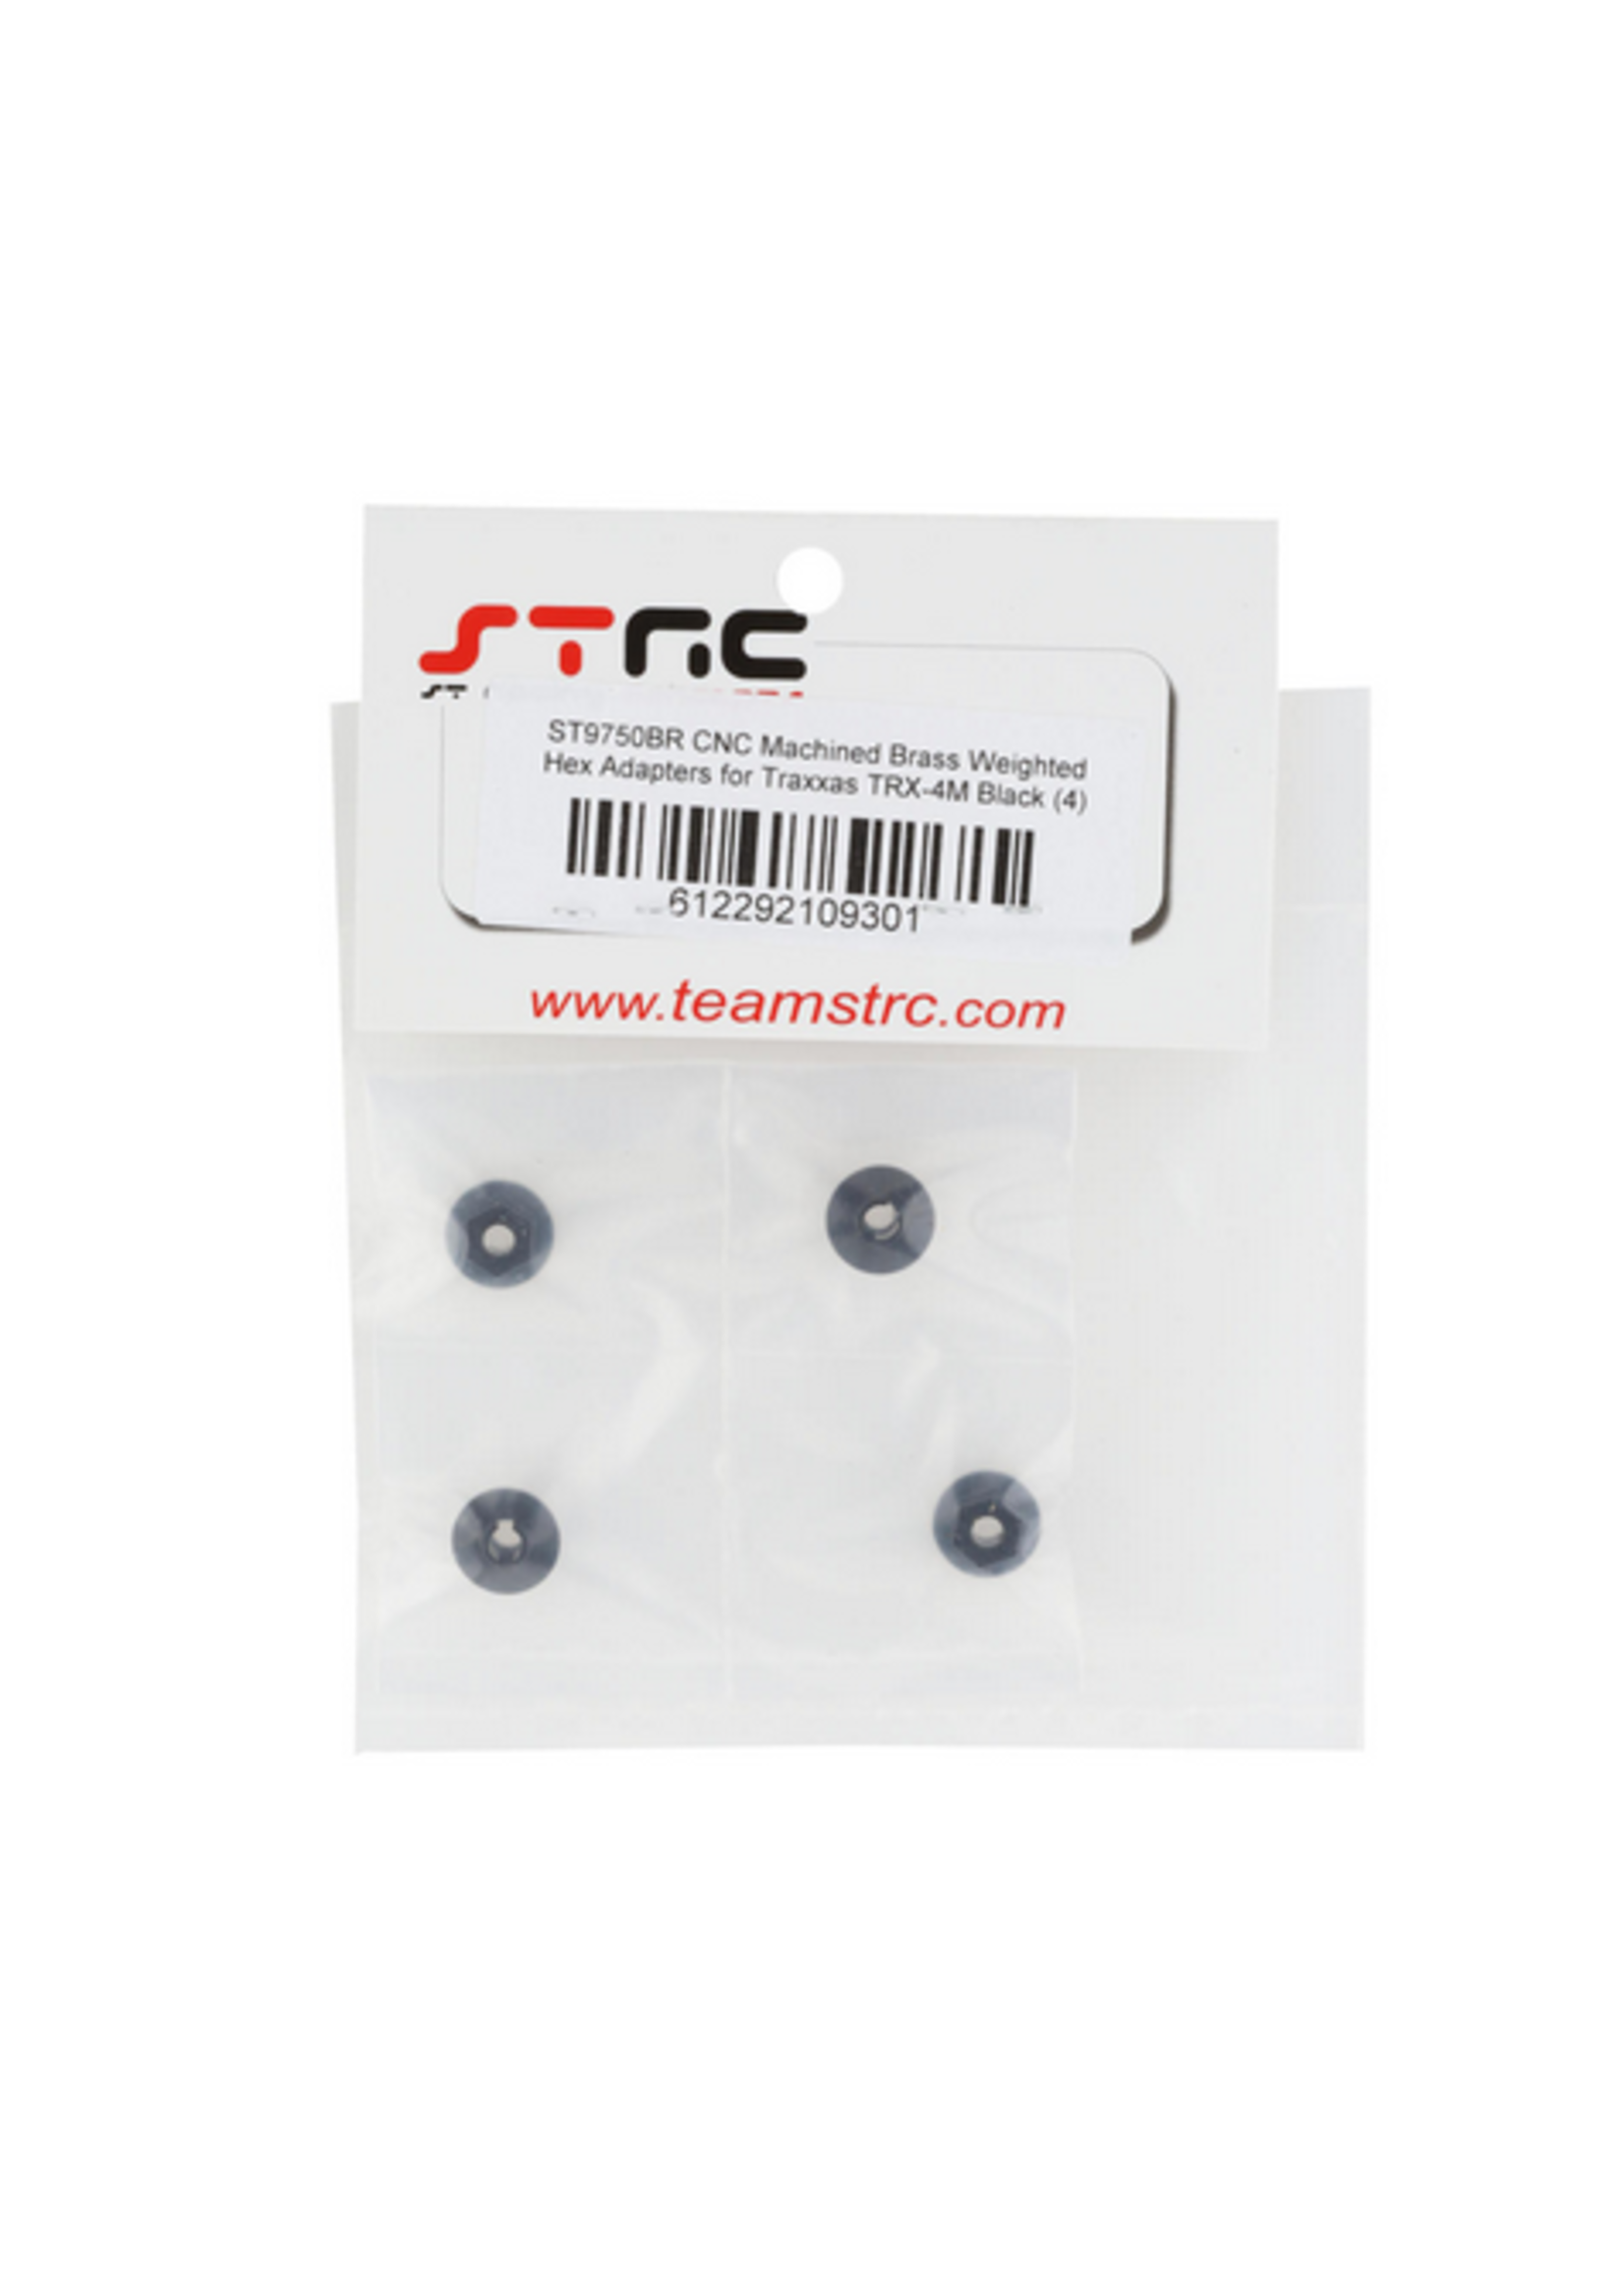 ST Racing Concepts ST9750BR ST Racing Concepts Brass Weighted Hex Adapters for Traxxas TRX-4M Black (4)